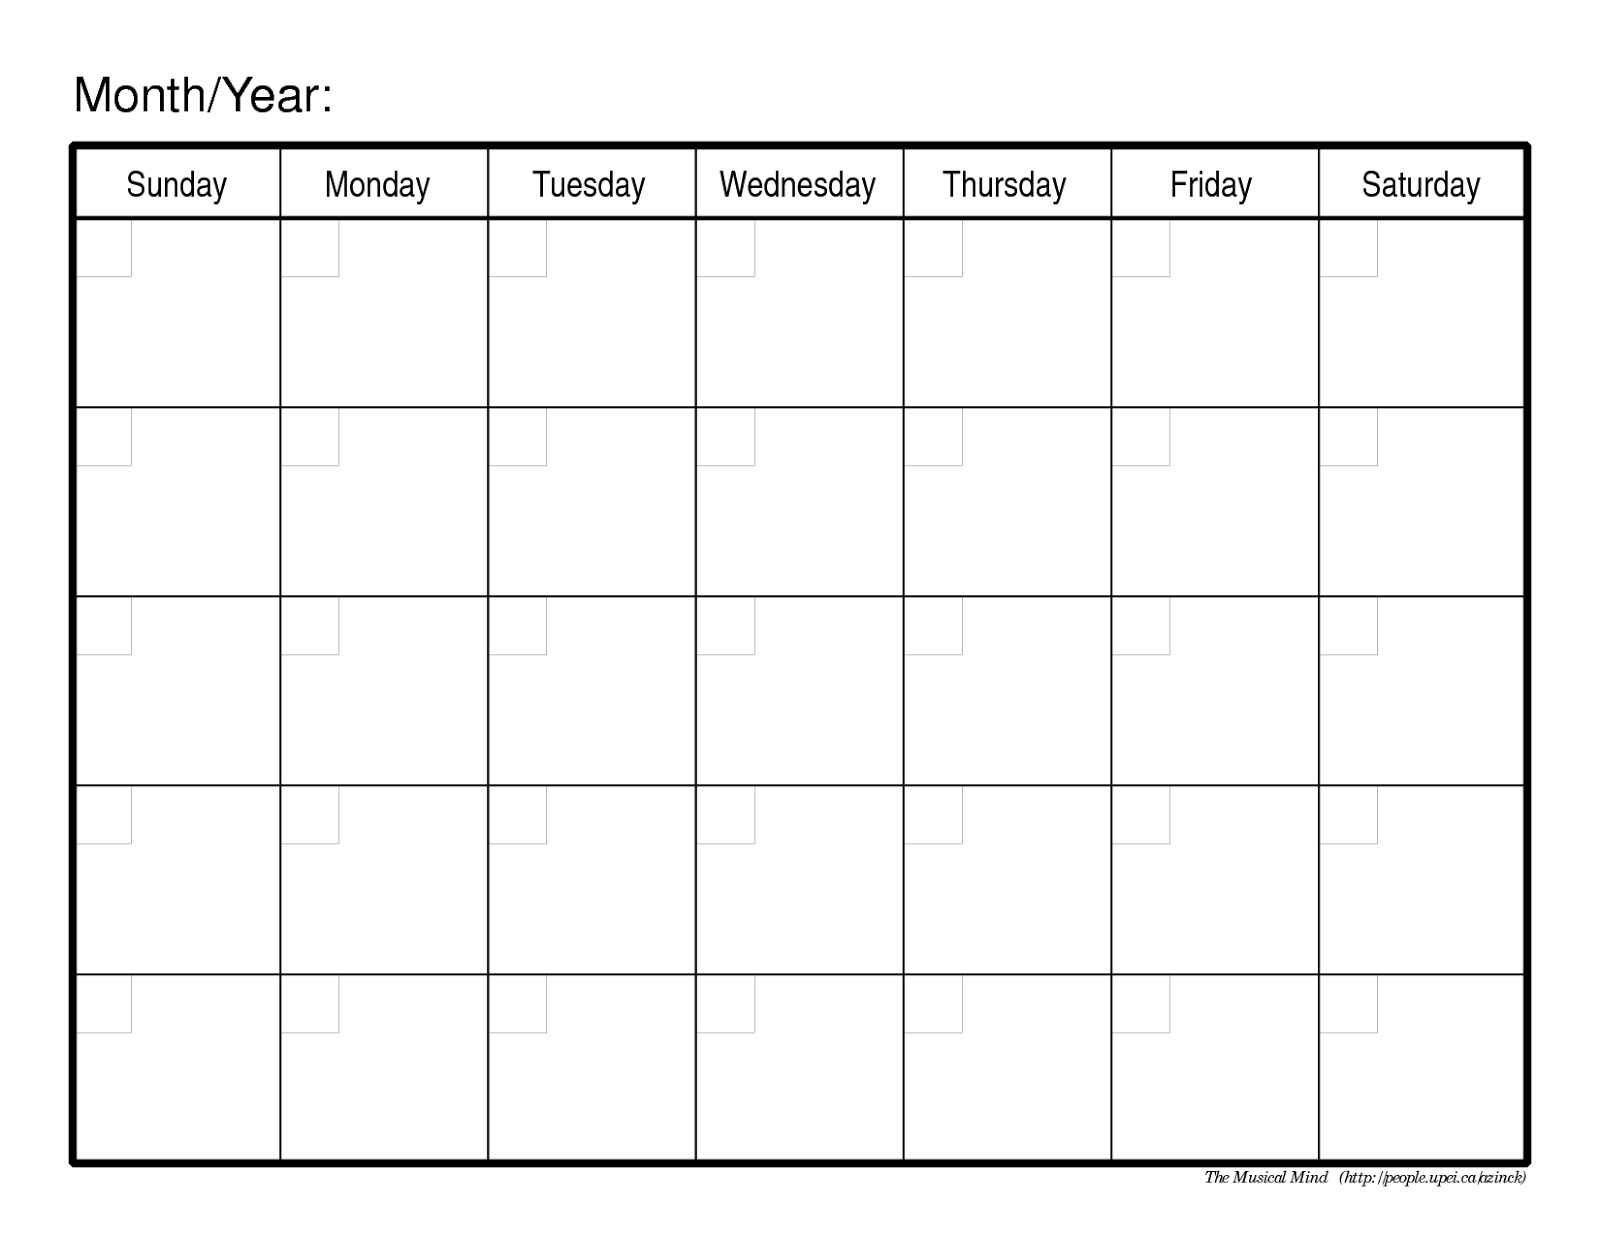 Monthly Calendar No Dates – Printable Month Calendar Blank Monthly Planner No Dates